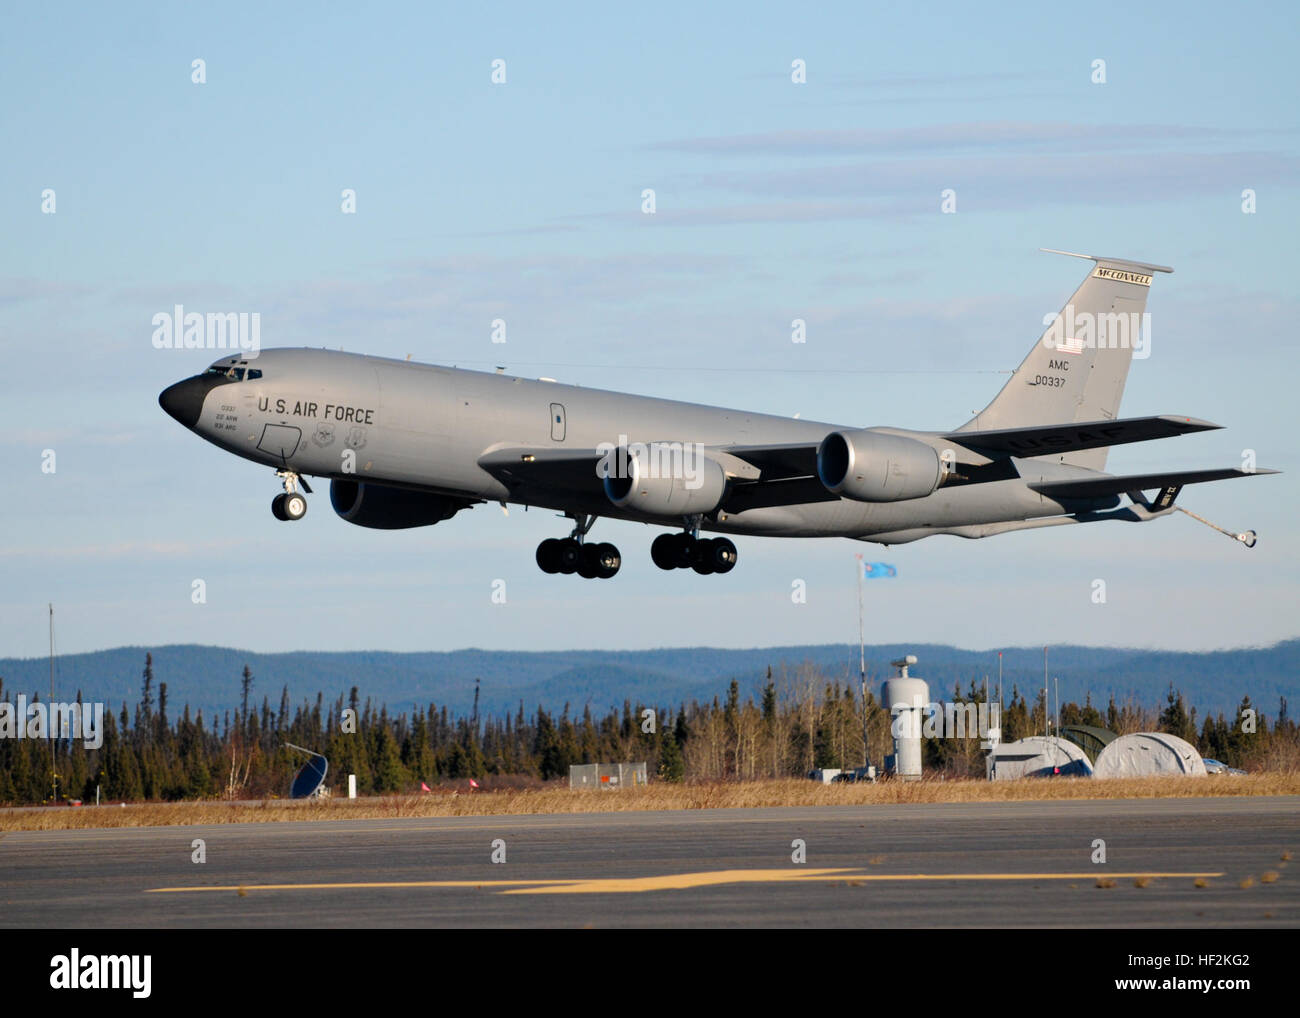 A KC-135 Stratotanker from 22nd Air Refueling Wing, lifts off from 5 Wing Goose Bay, Newfoundland and Labrador, Canada, during exercise Vigilant Shield 15, Oct. 23, 2014. The Vigilant Shield field training exercise is a bi-national NORAD Command exercise which provides realistic training and practice for American and Canadian forces in support of respective national strategy for North America’s defense. NORAD ensures U.S. and Canadian air sovereignty through a network of alert fighters, tankers, airborne early warning aircraft, and ground-based air defense assets cued by interagency and defens Stock Photo